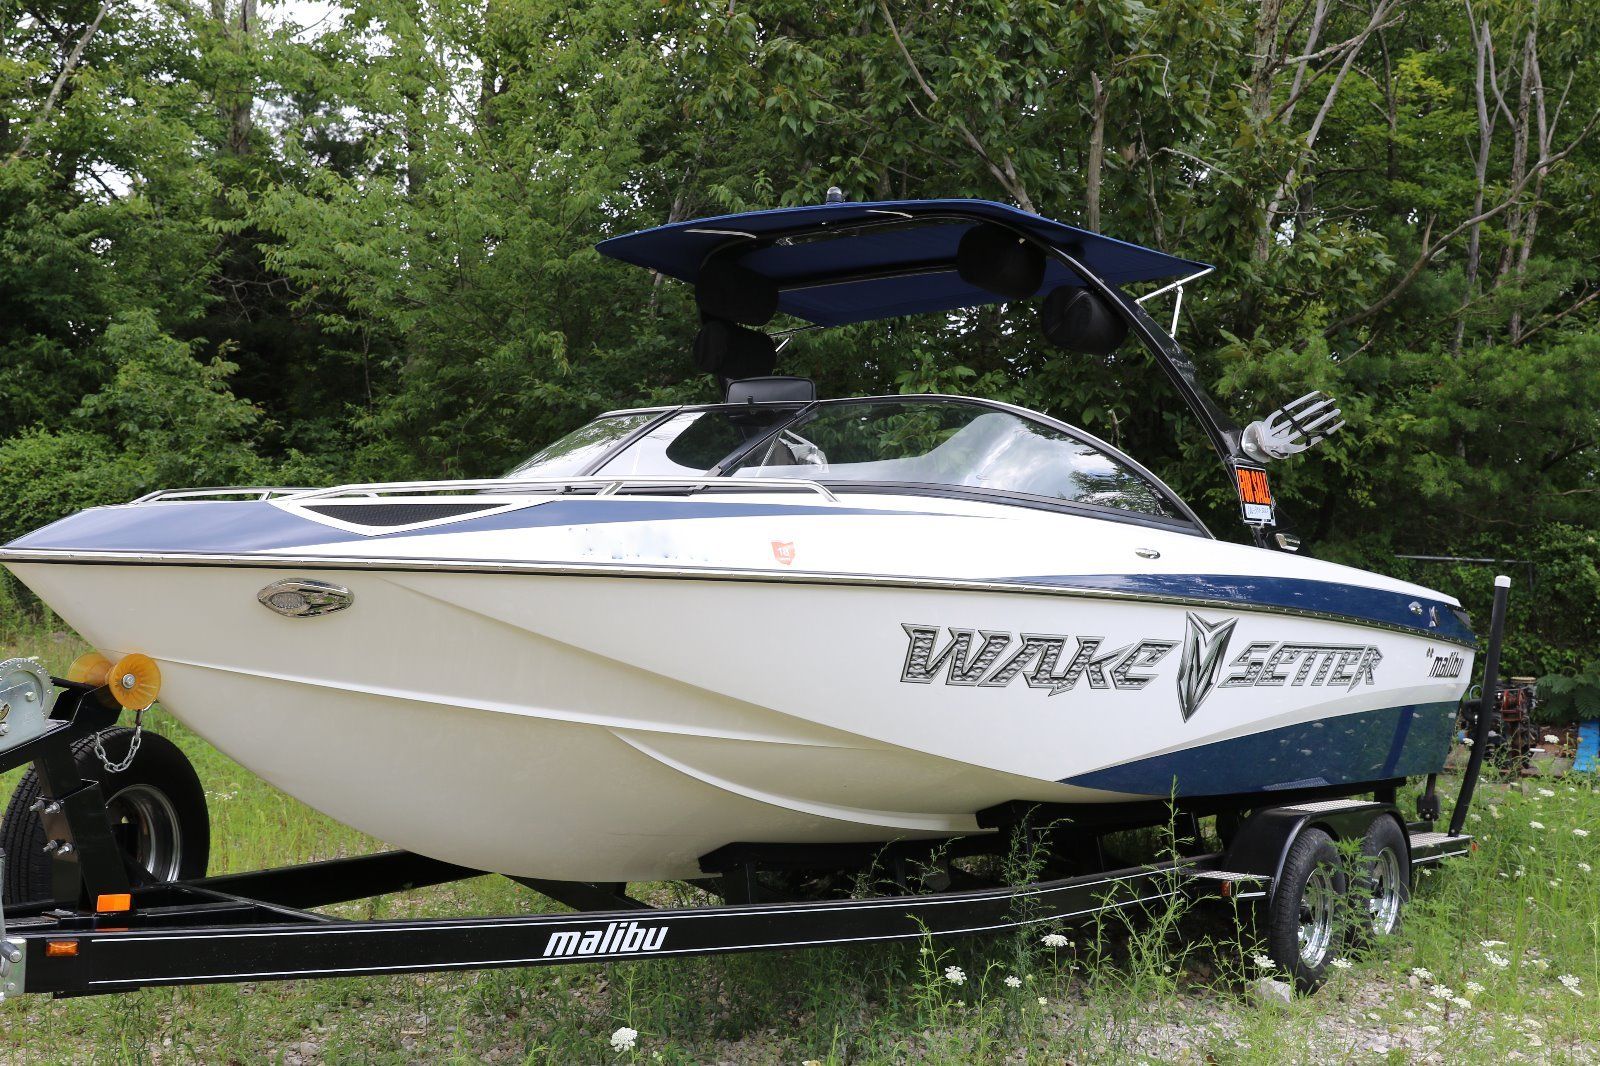 Malibu Wakesetter 247 LSV 2008 for sale for $52,000 - Boats-from-USA.com